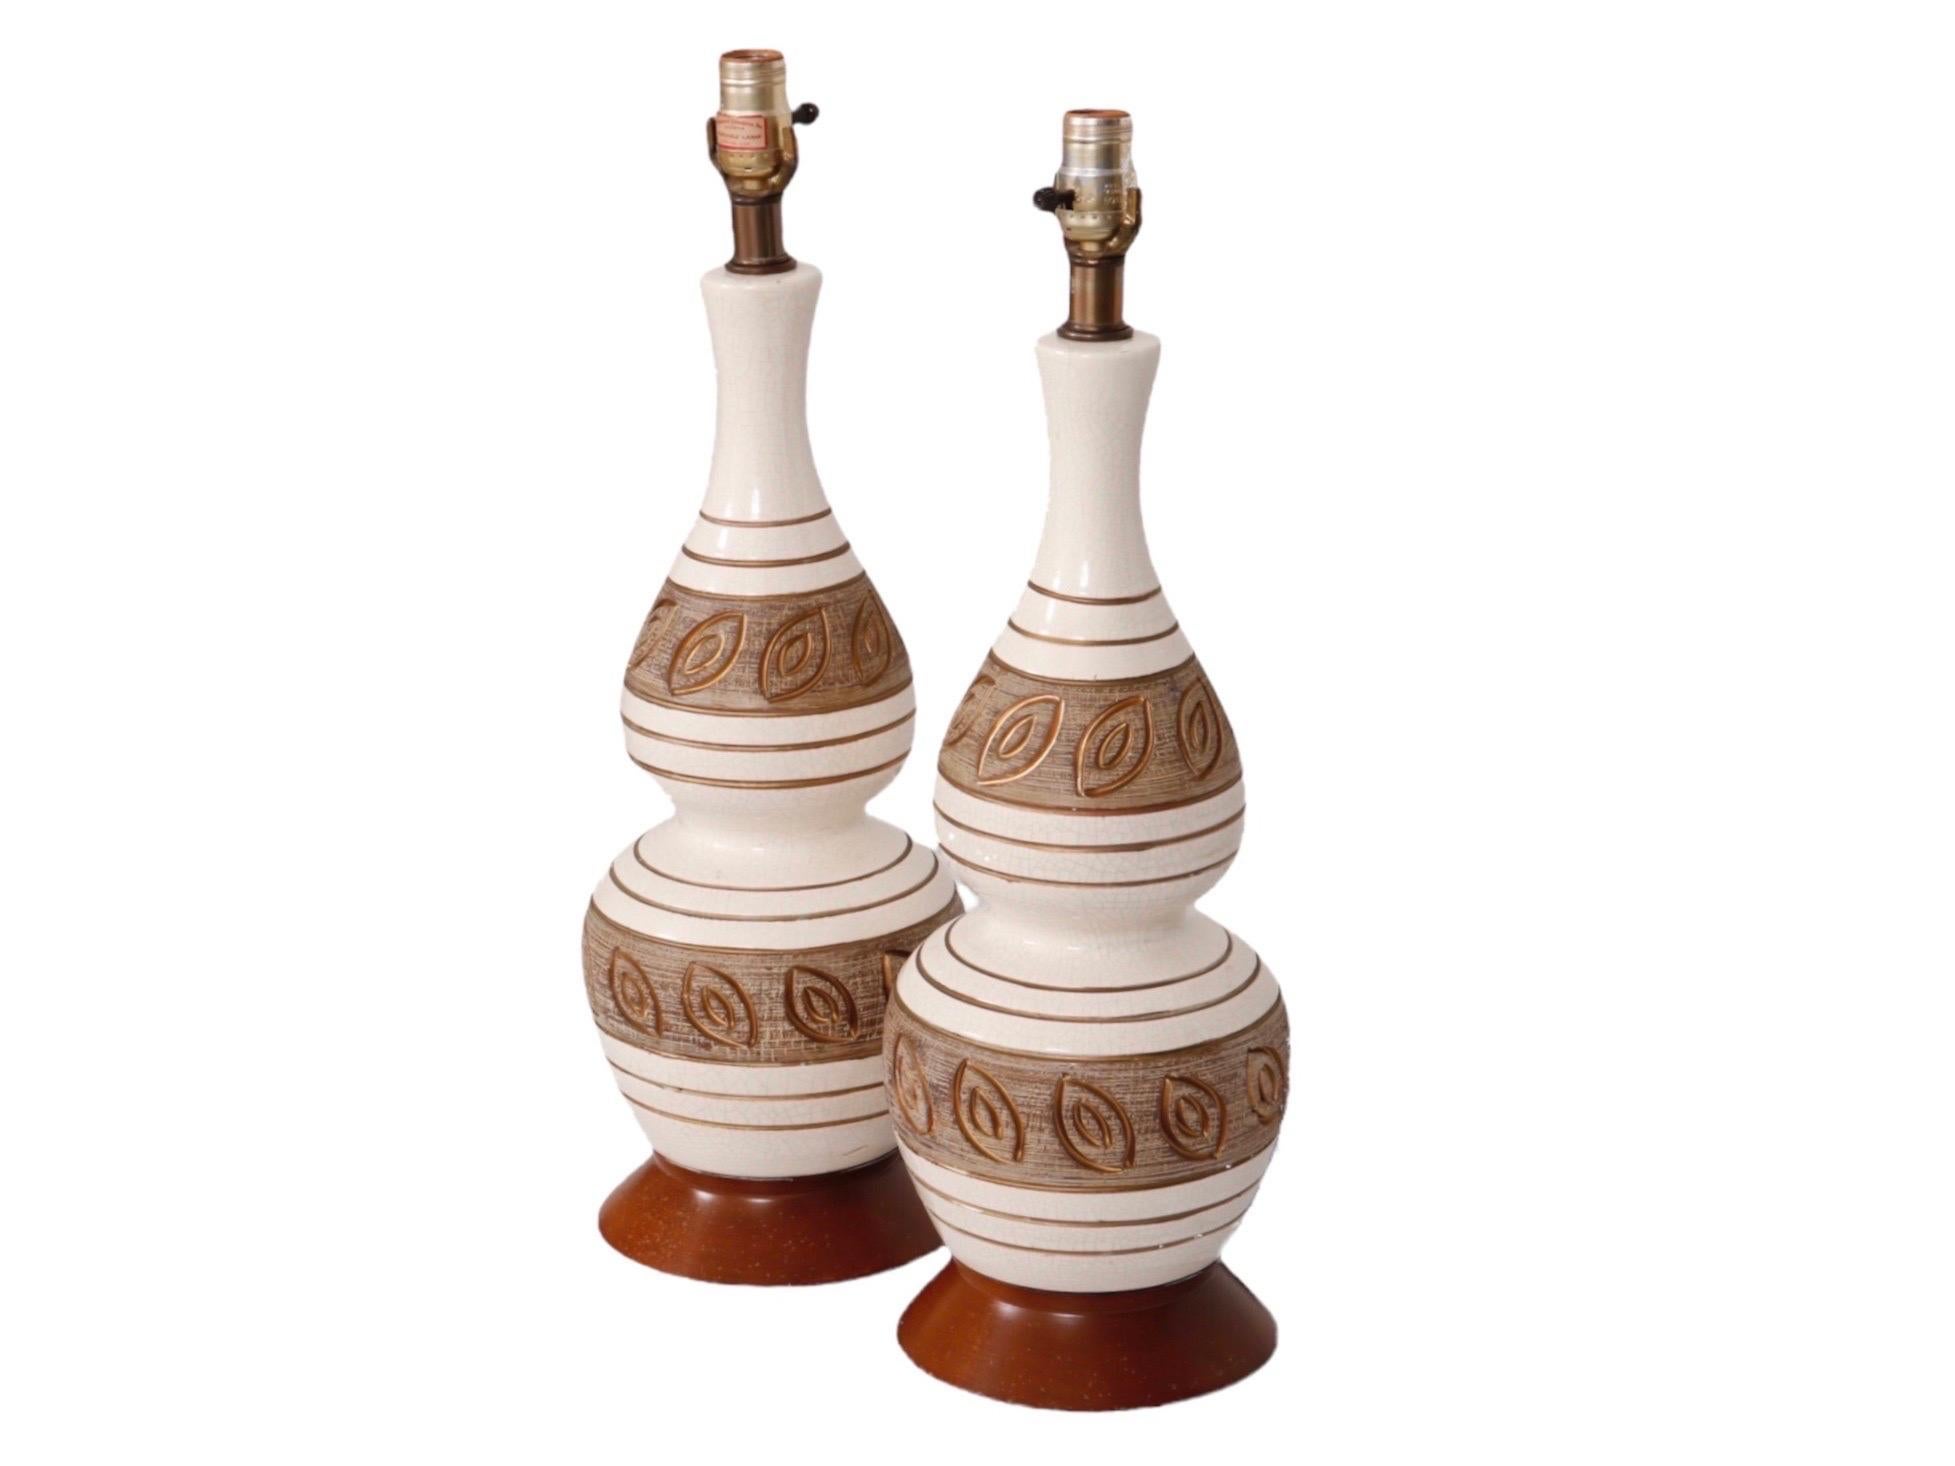 A pair of mid-century baluster shaped ceramic and teak table lamps. Finished in a white craquelure glaze, hand decorated with horizontal lines and a simple leaf motif in gold. The leaf pattern is set against a brown glazed background marked in such